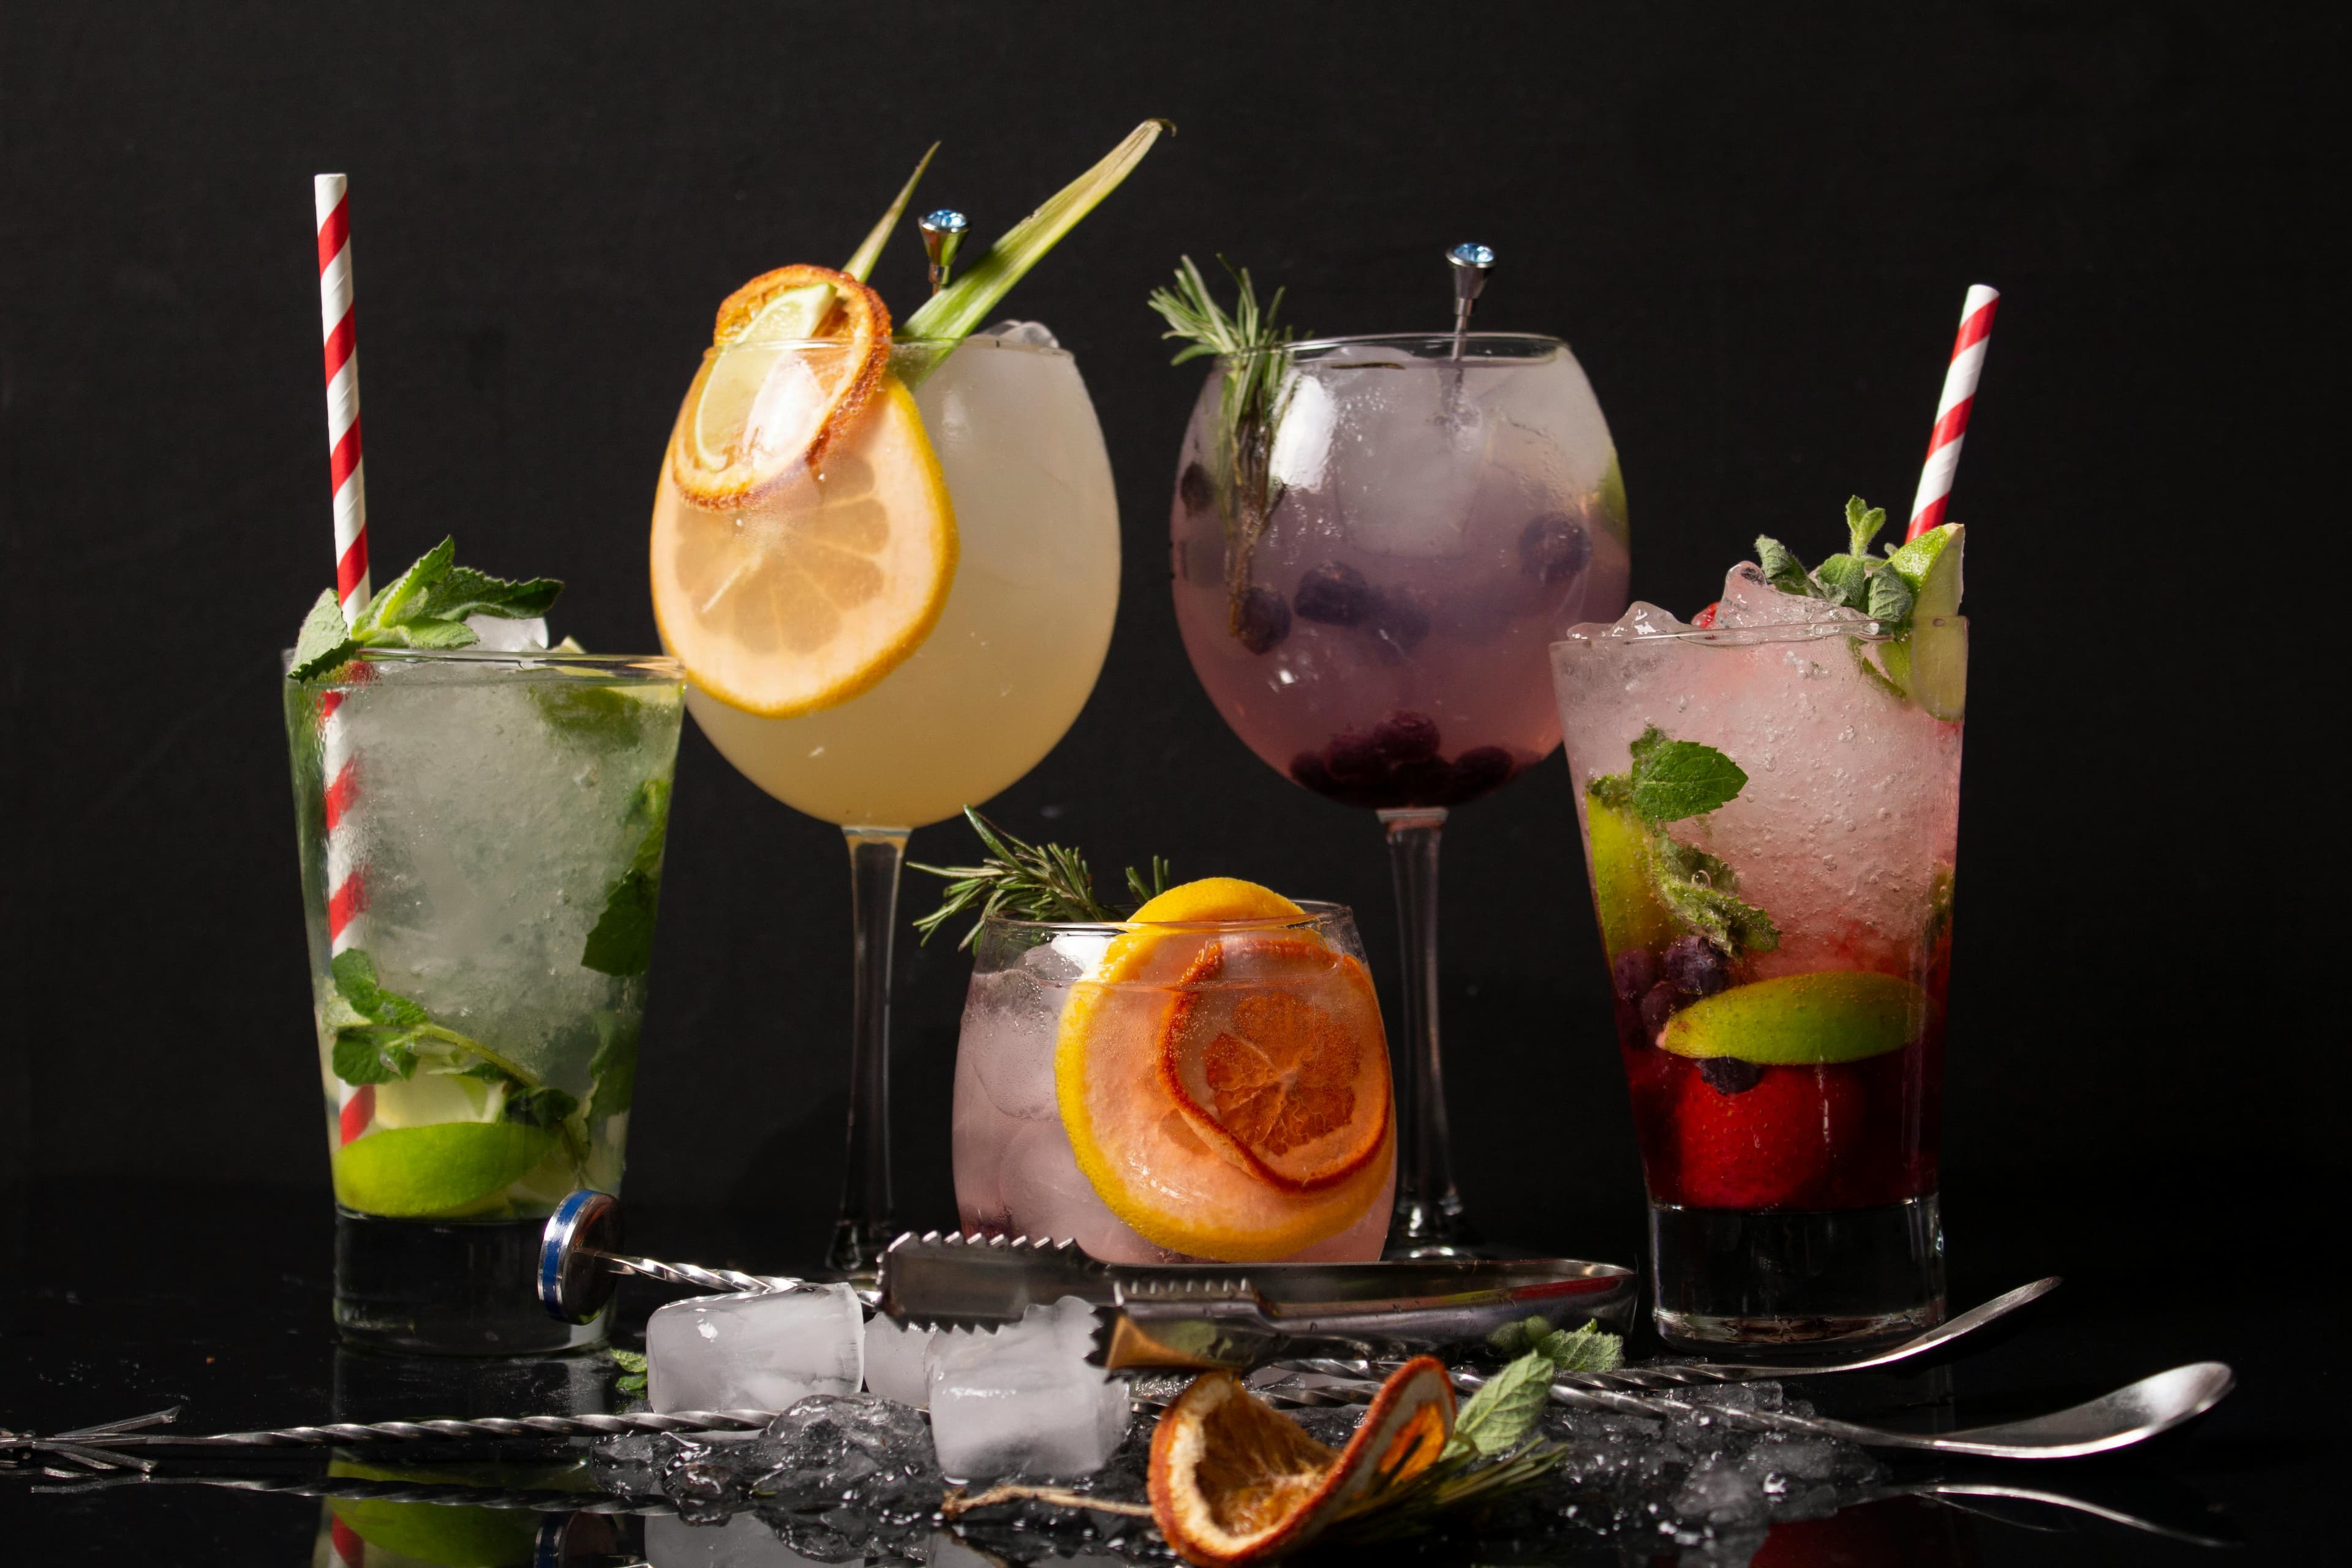 So elevate your mixology game as we dive into the world of monsoon fruit cocktails, shall we?